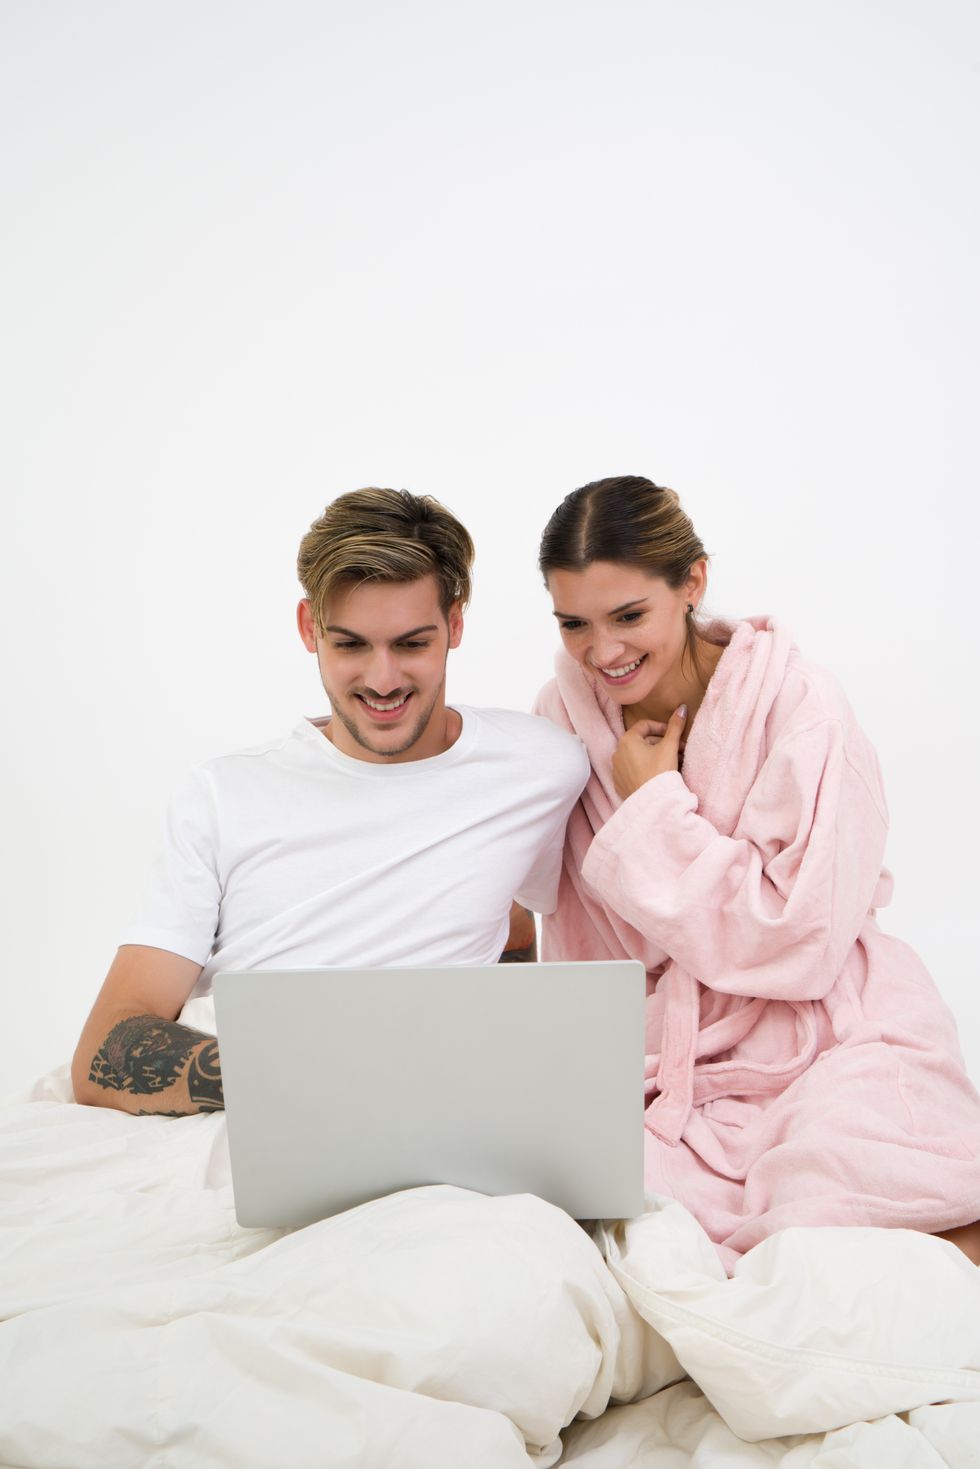 man in white shirt and woman in pink robe looking at a computer screen together in bed